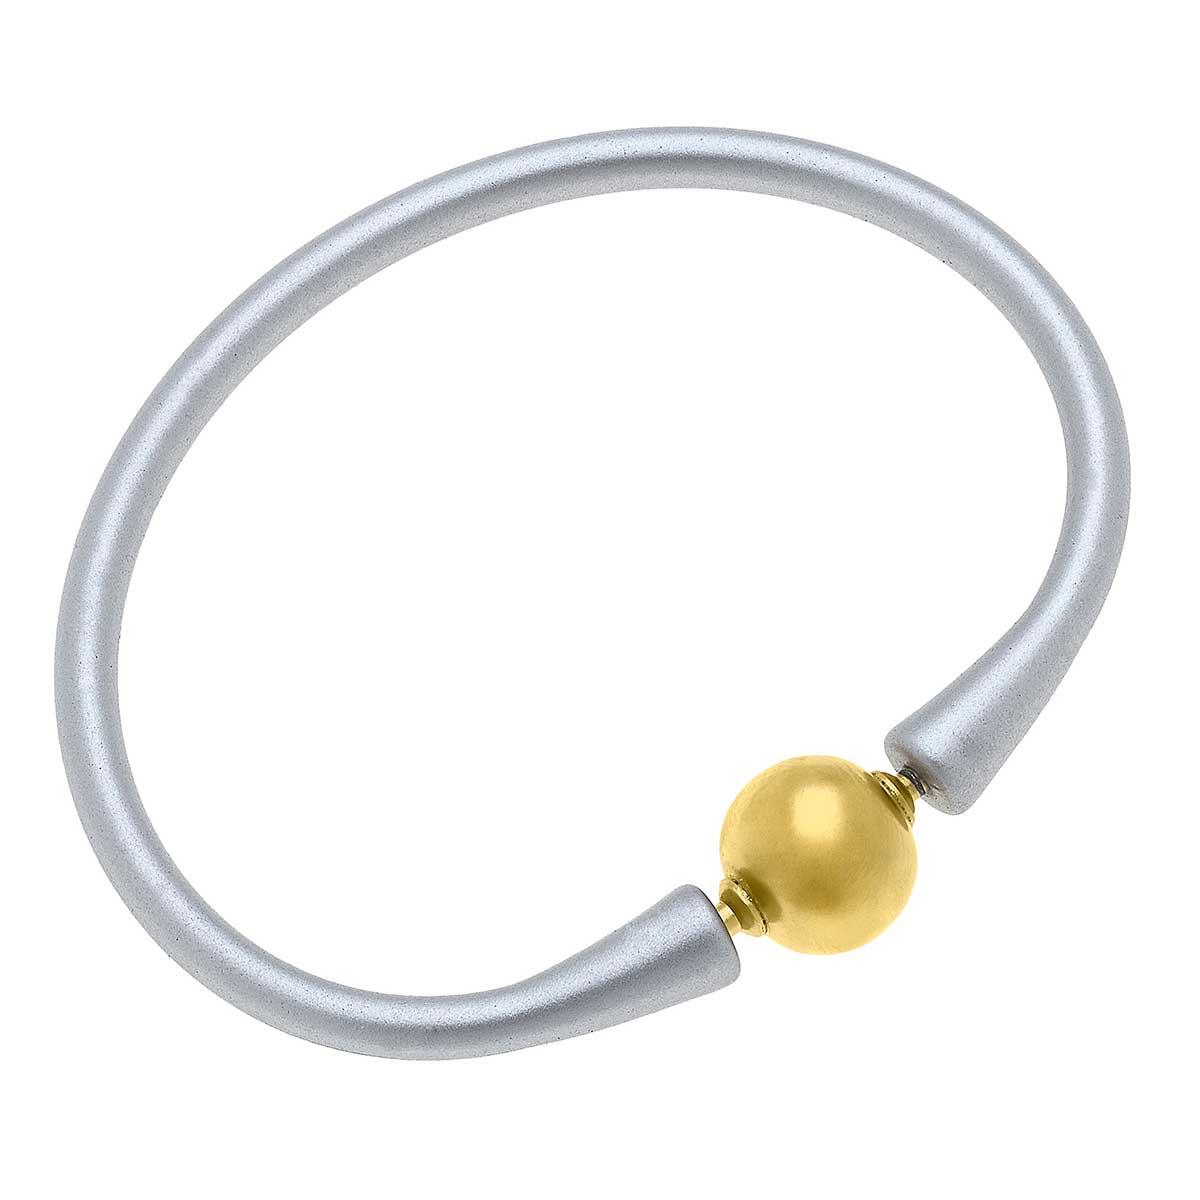 Bali 24K Gold Plated Ball Bead Silicone Bracelet in Metallic Silver